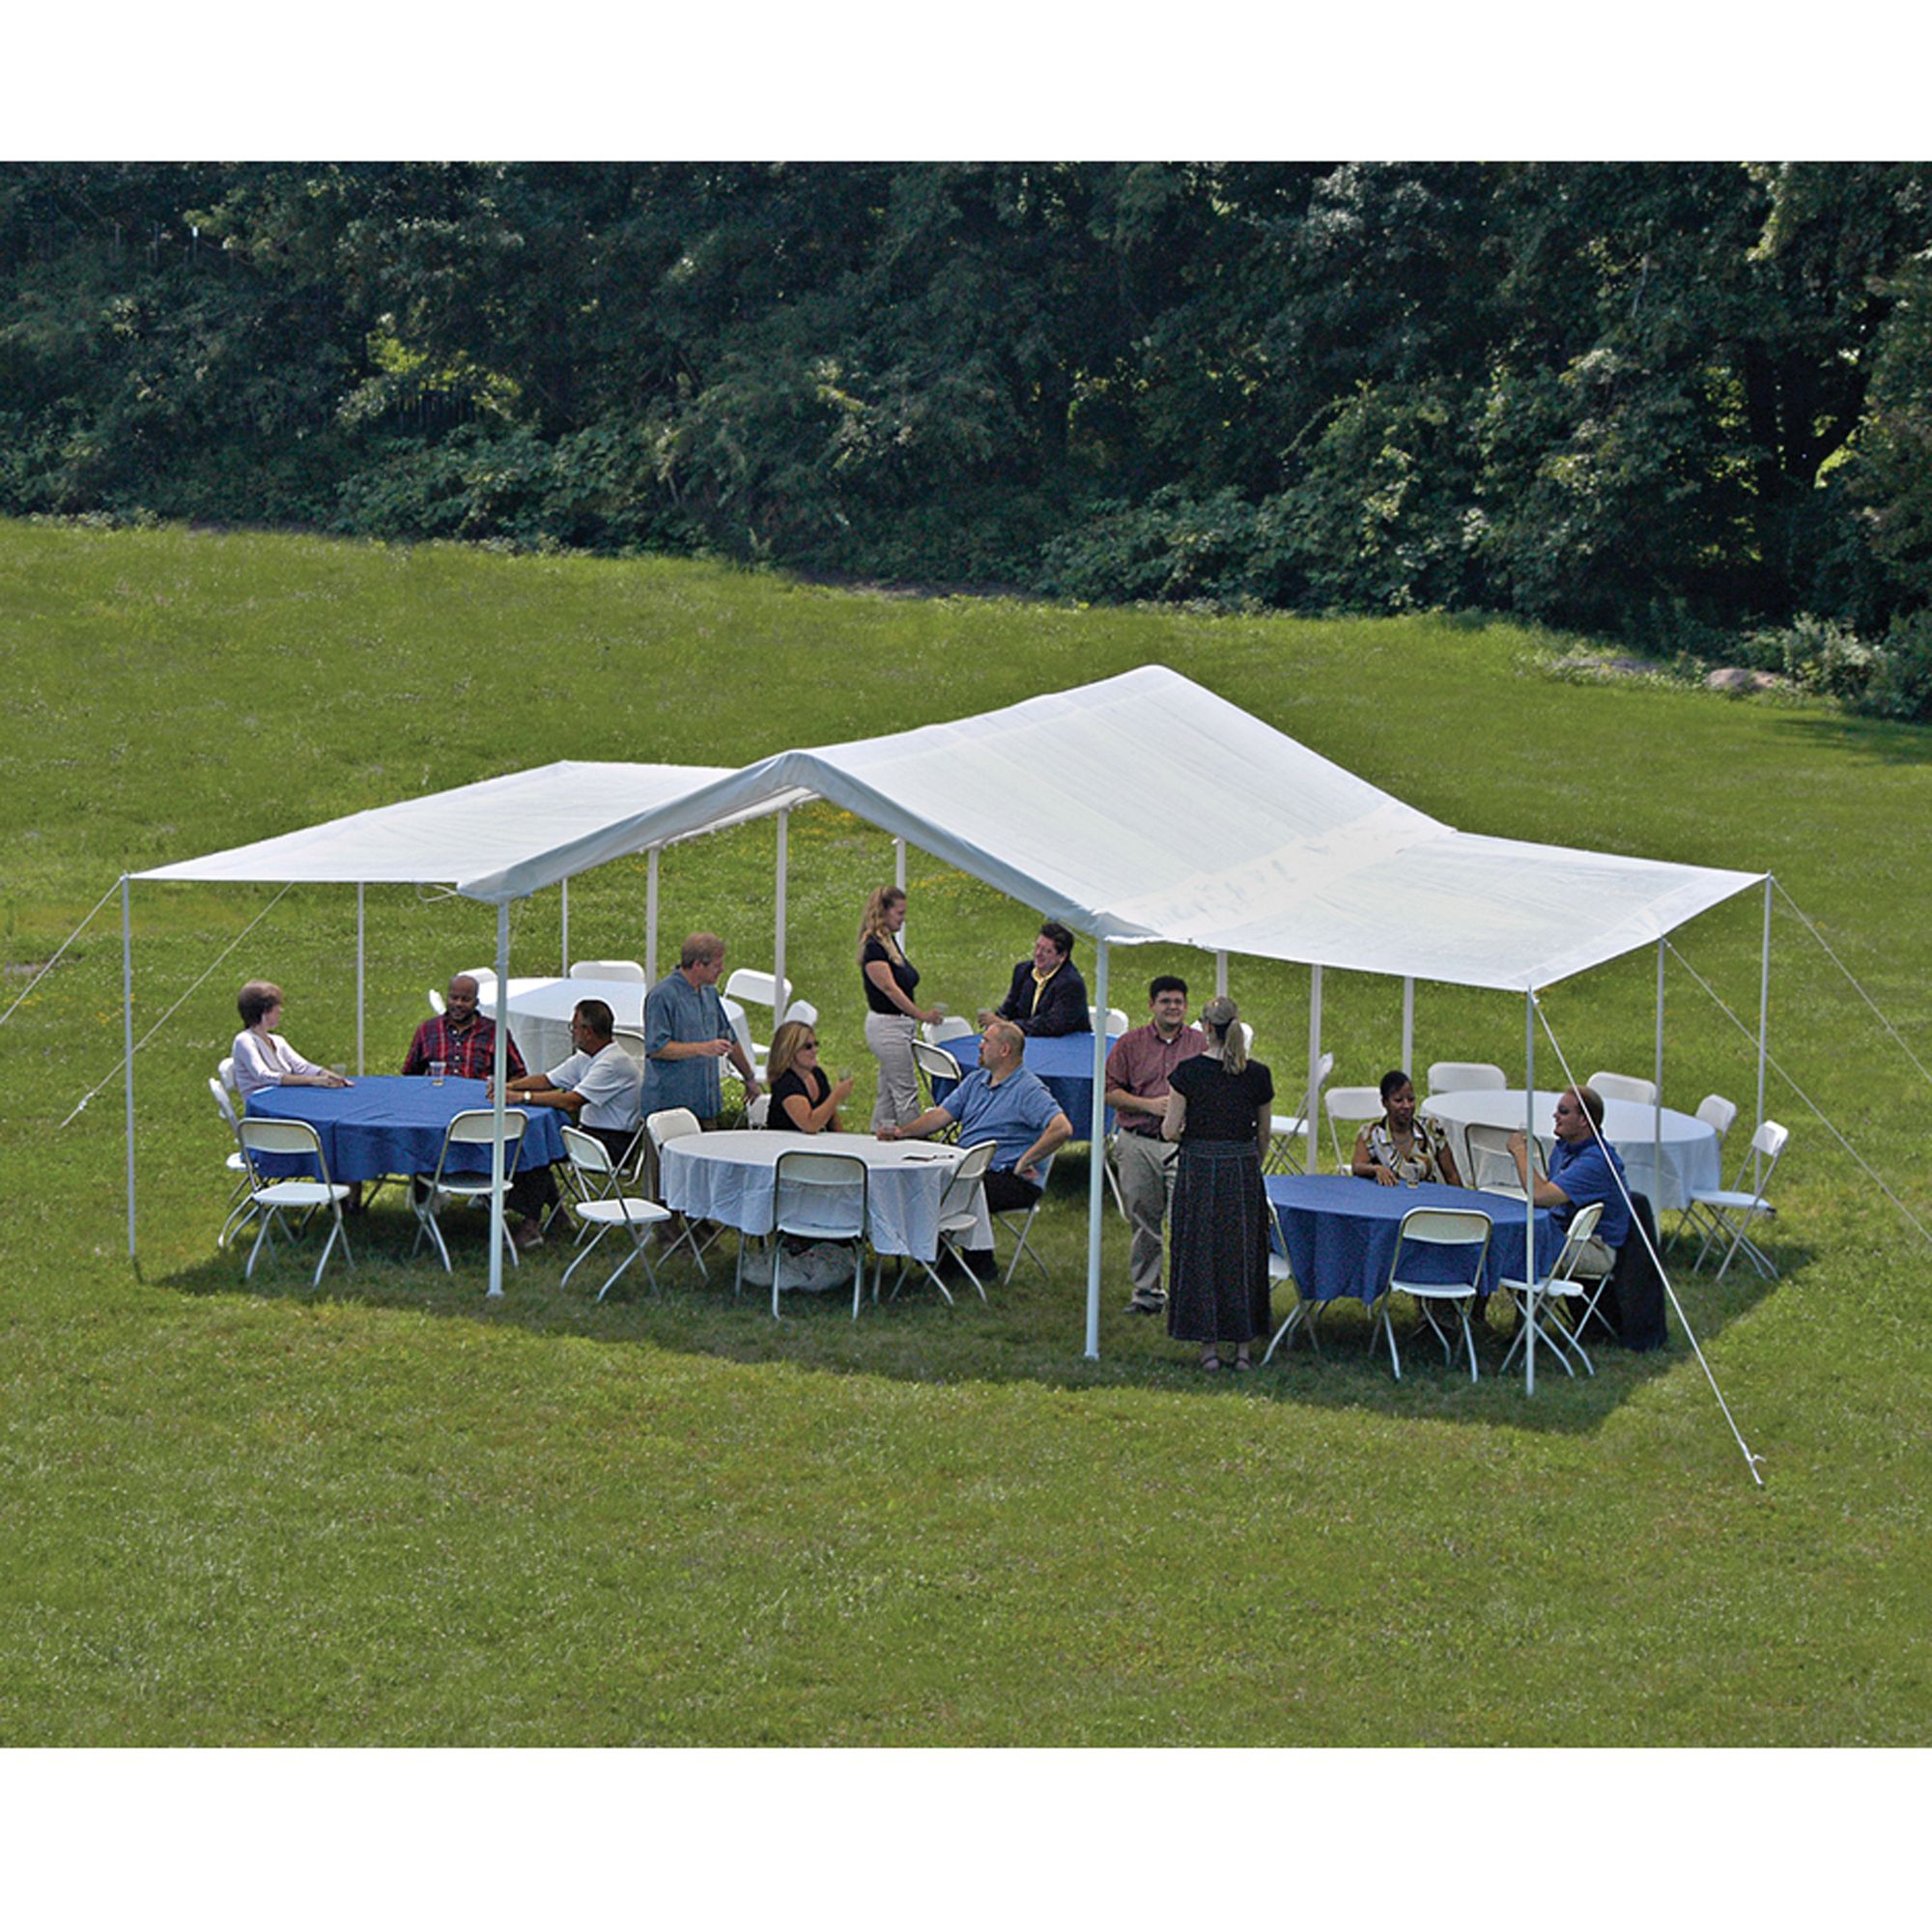 Shelter Logic 10 ft. x 20 ft. Extension Kit Canopy with 3 Layer